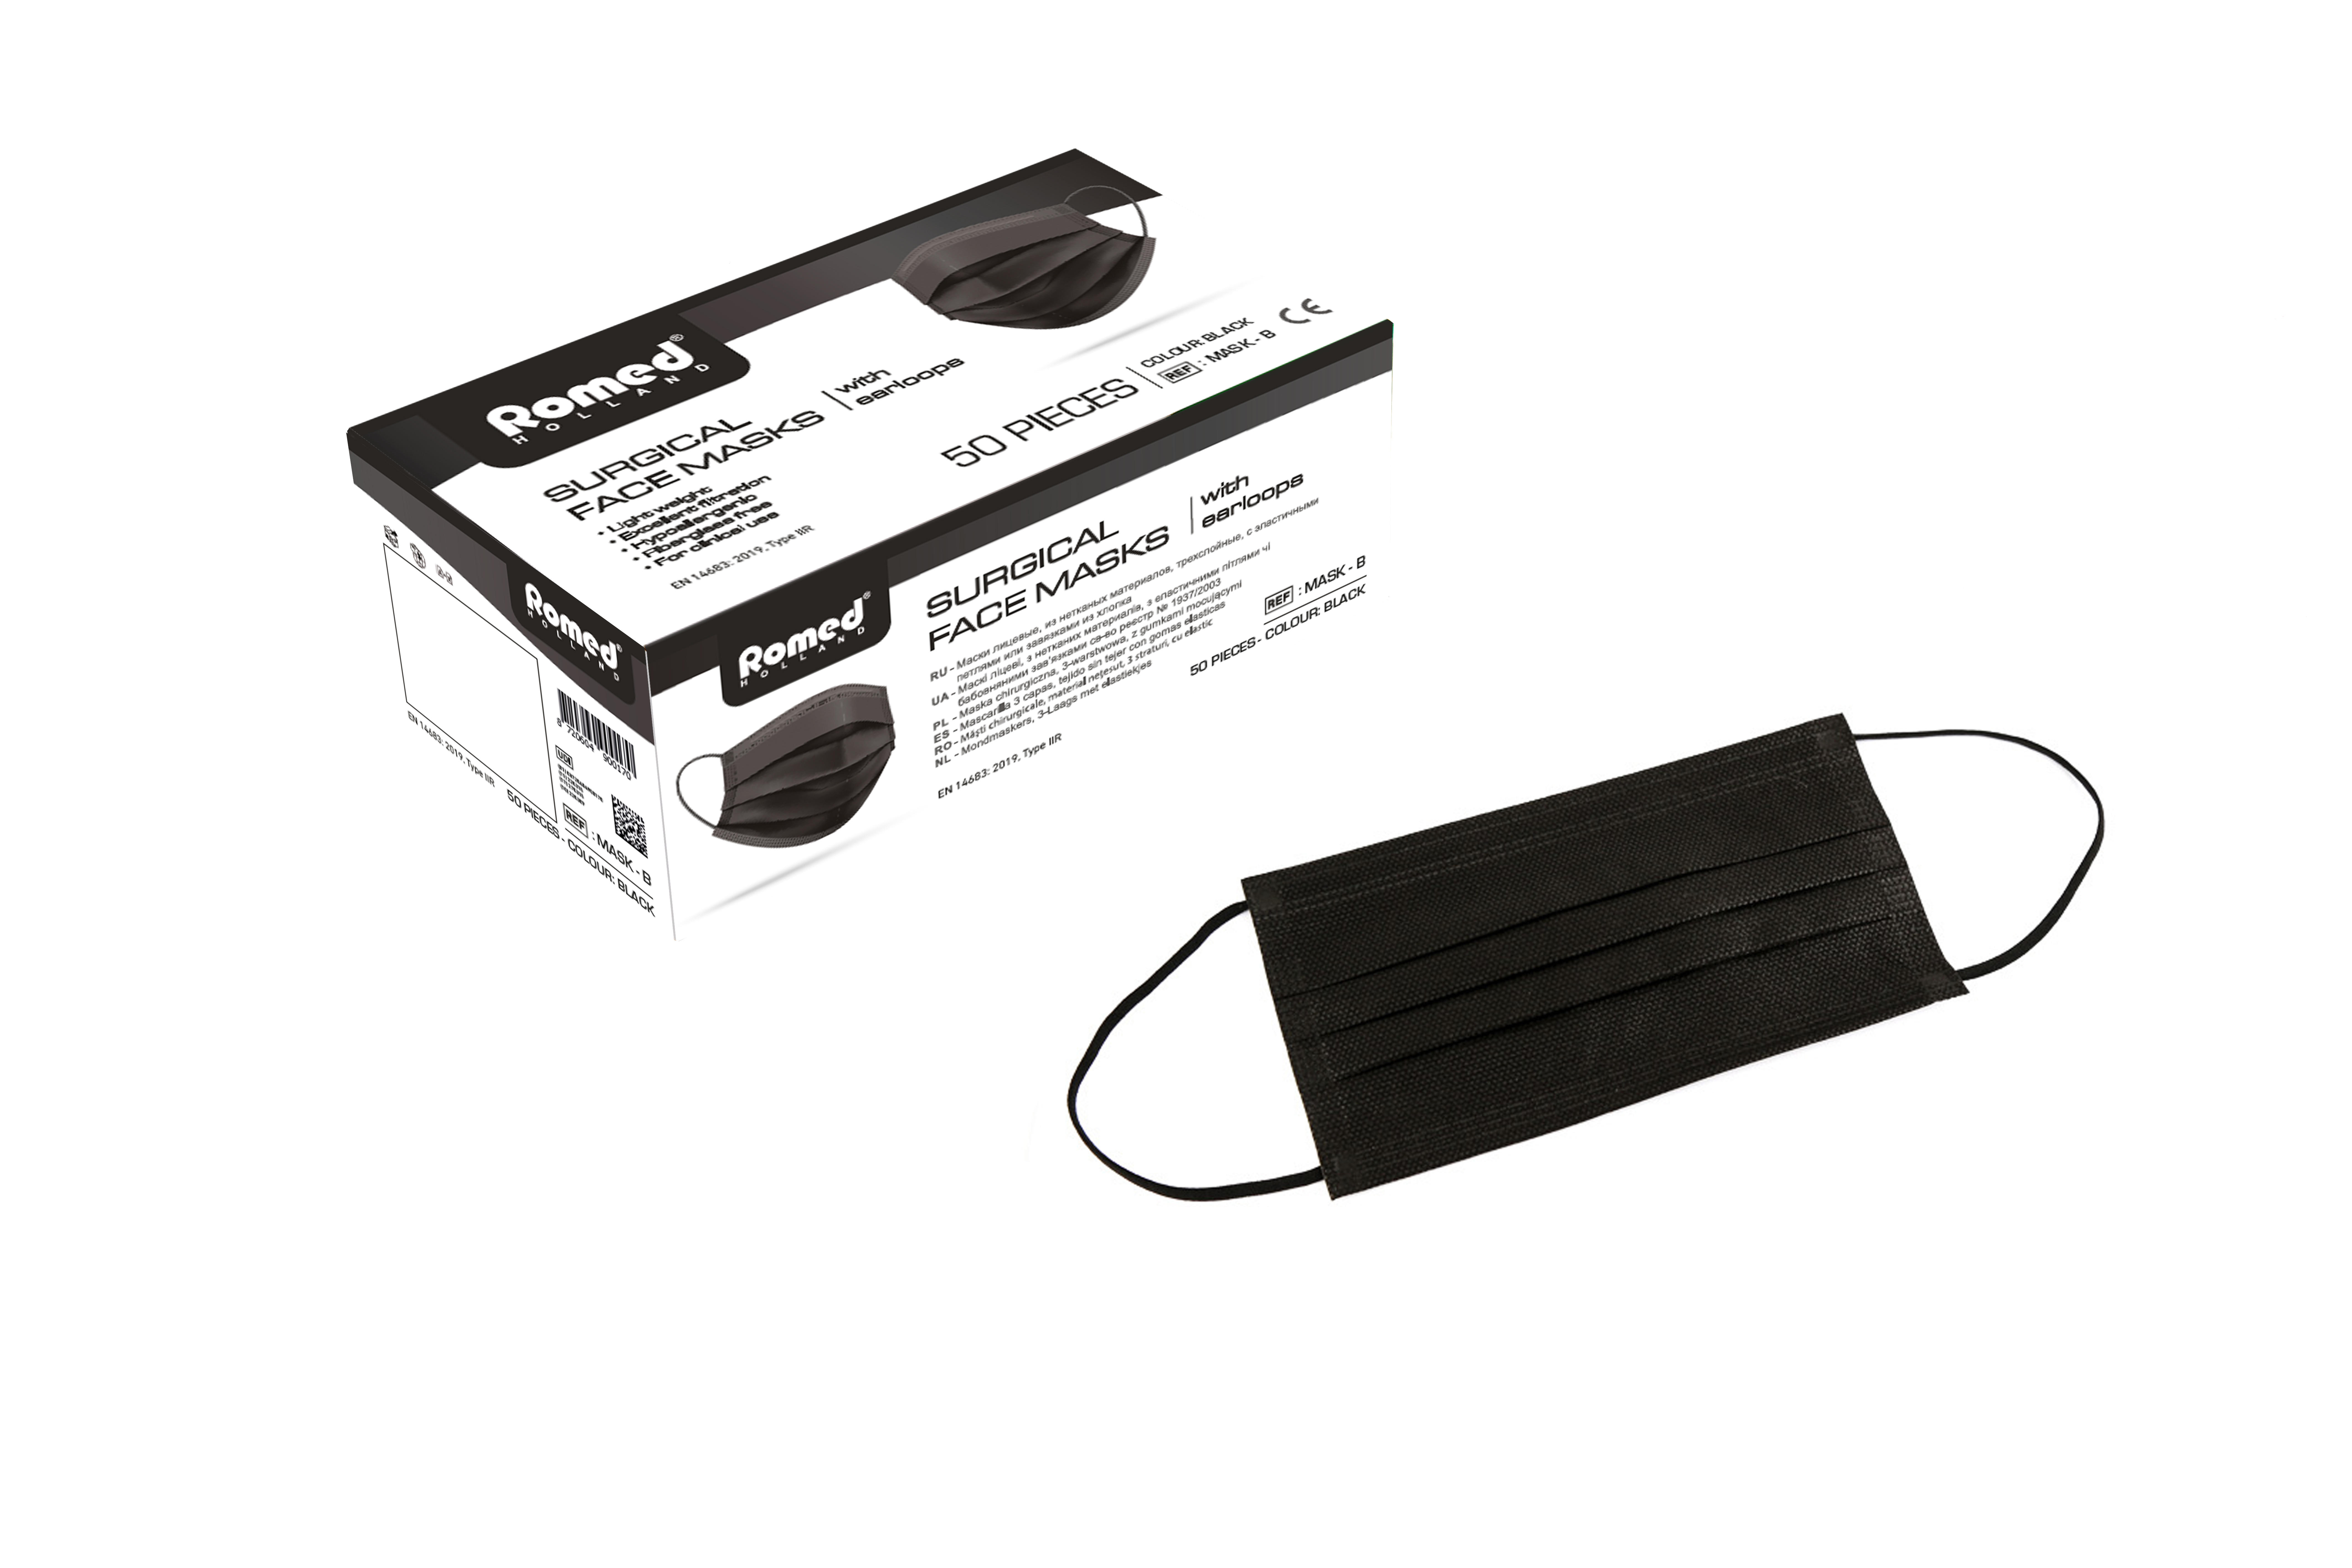 MASK-B Romed surgical face masks type IIR, 3-ply, non-woven, with elastic loops, black, per 50 pcs in an inner box, 20 x 50 pcs = 1.000 pcs in a carton.